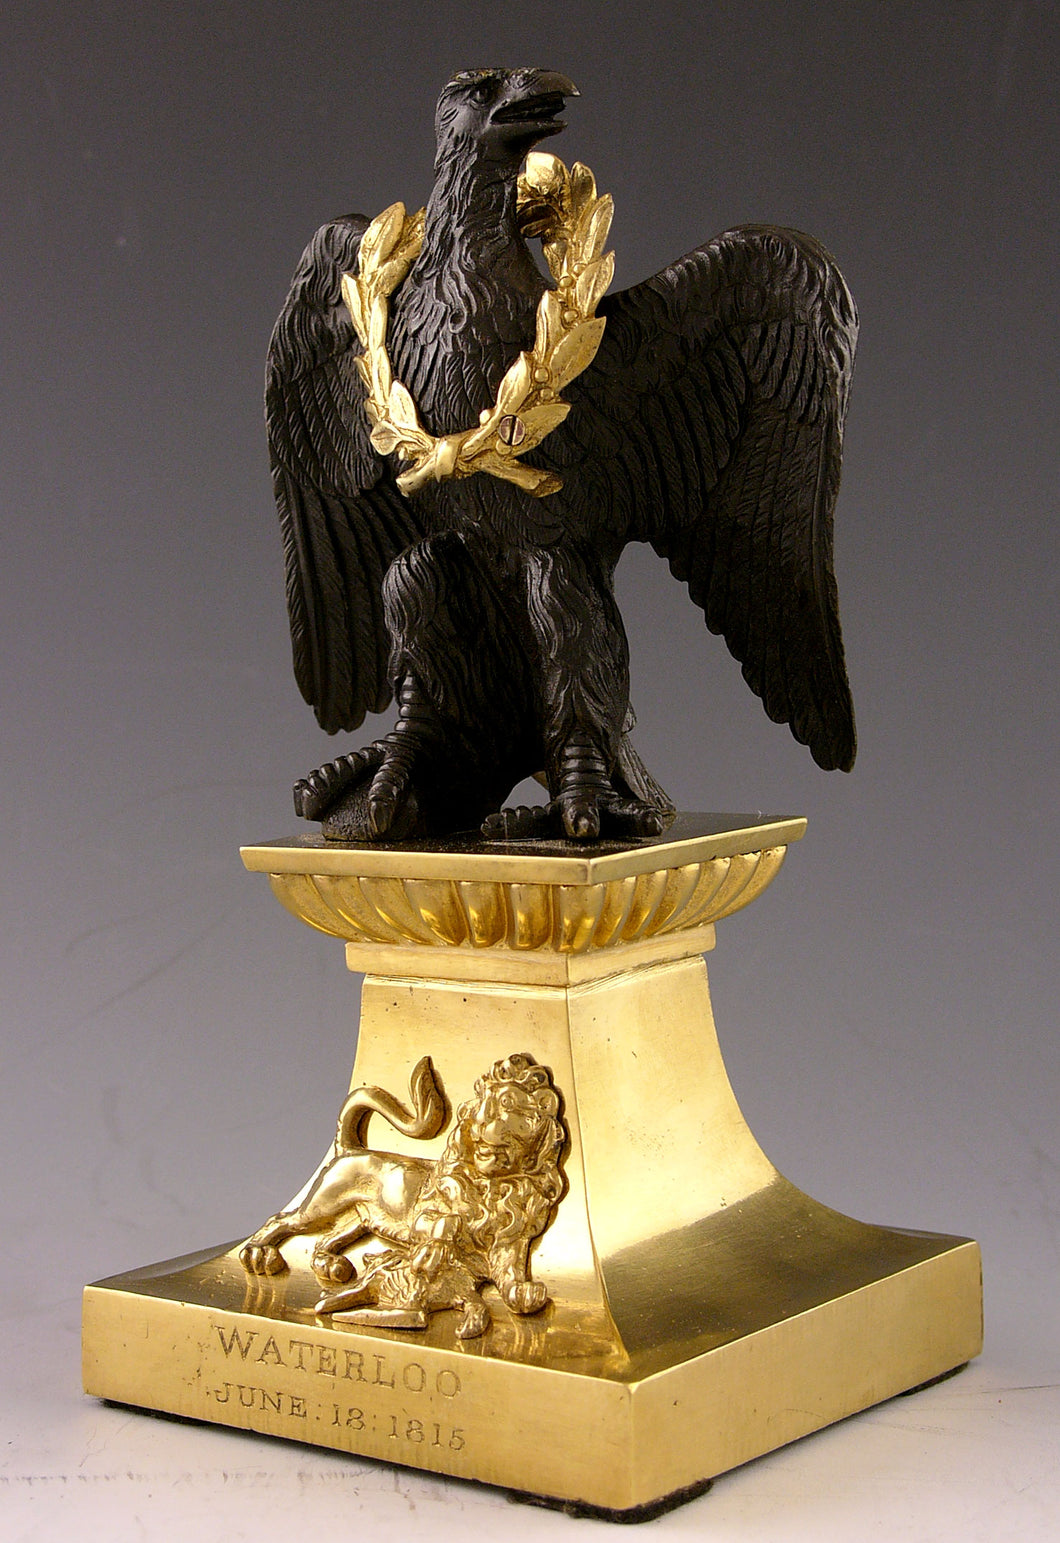 A Mid 19th Century Cast Bronze and Ormolu Figure Commemorating the Battle of Waterloo, Circa 1865 or earlier